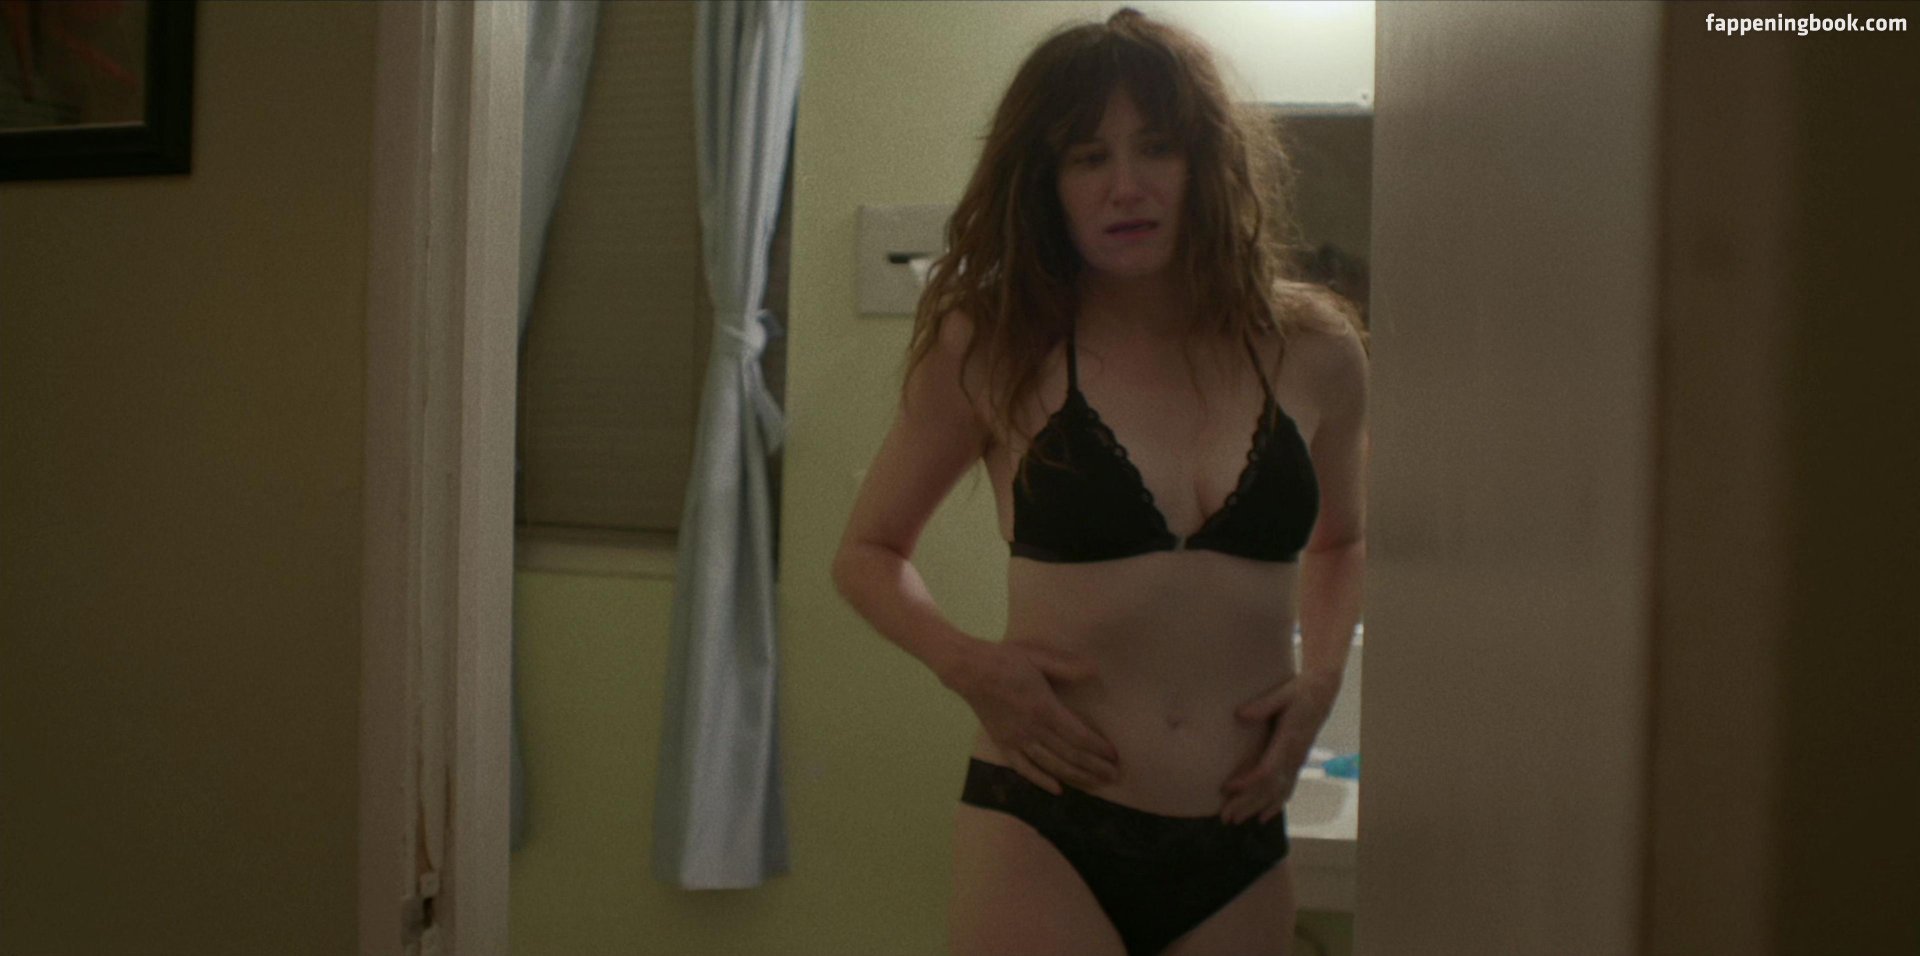 Kathryn Hahn Nude, The Fappening - Photo #290518 - FappeningBook.